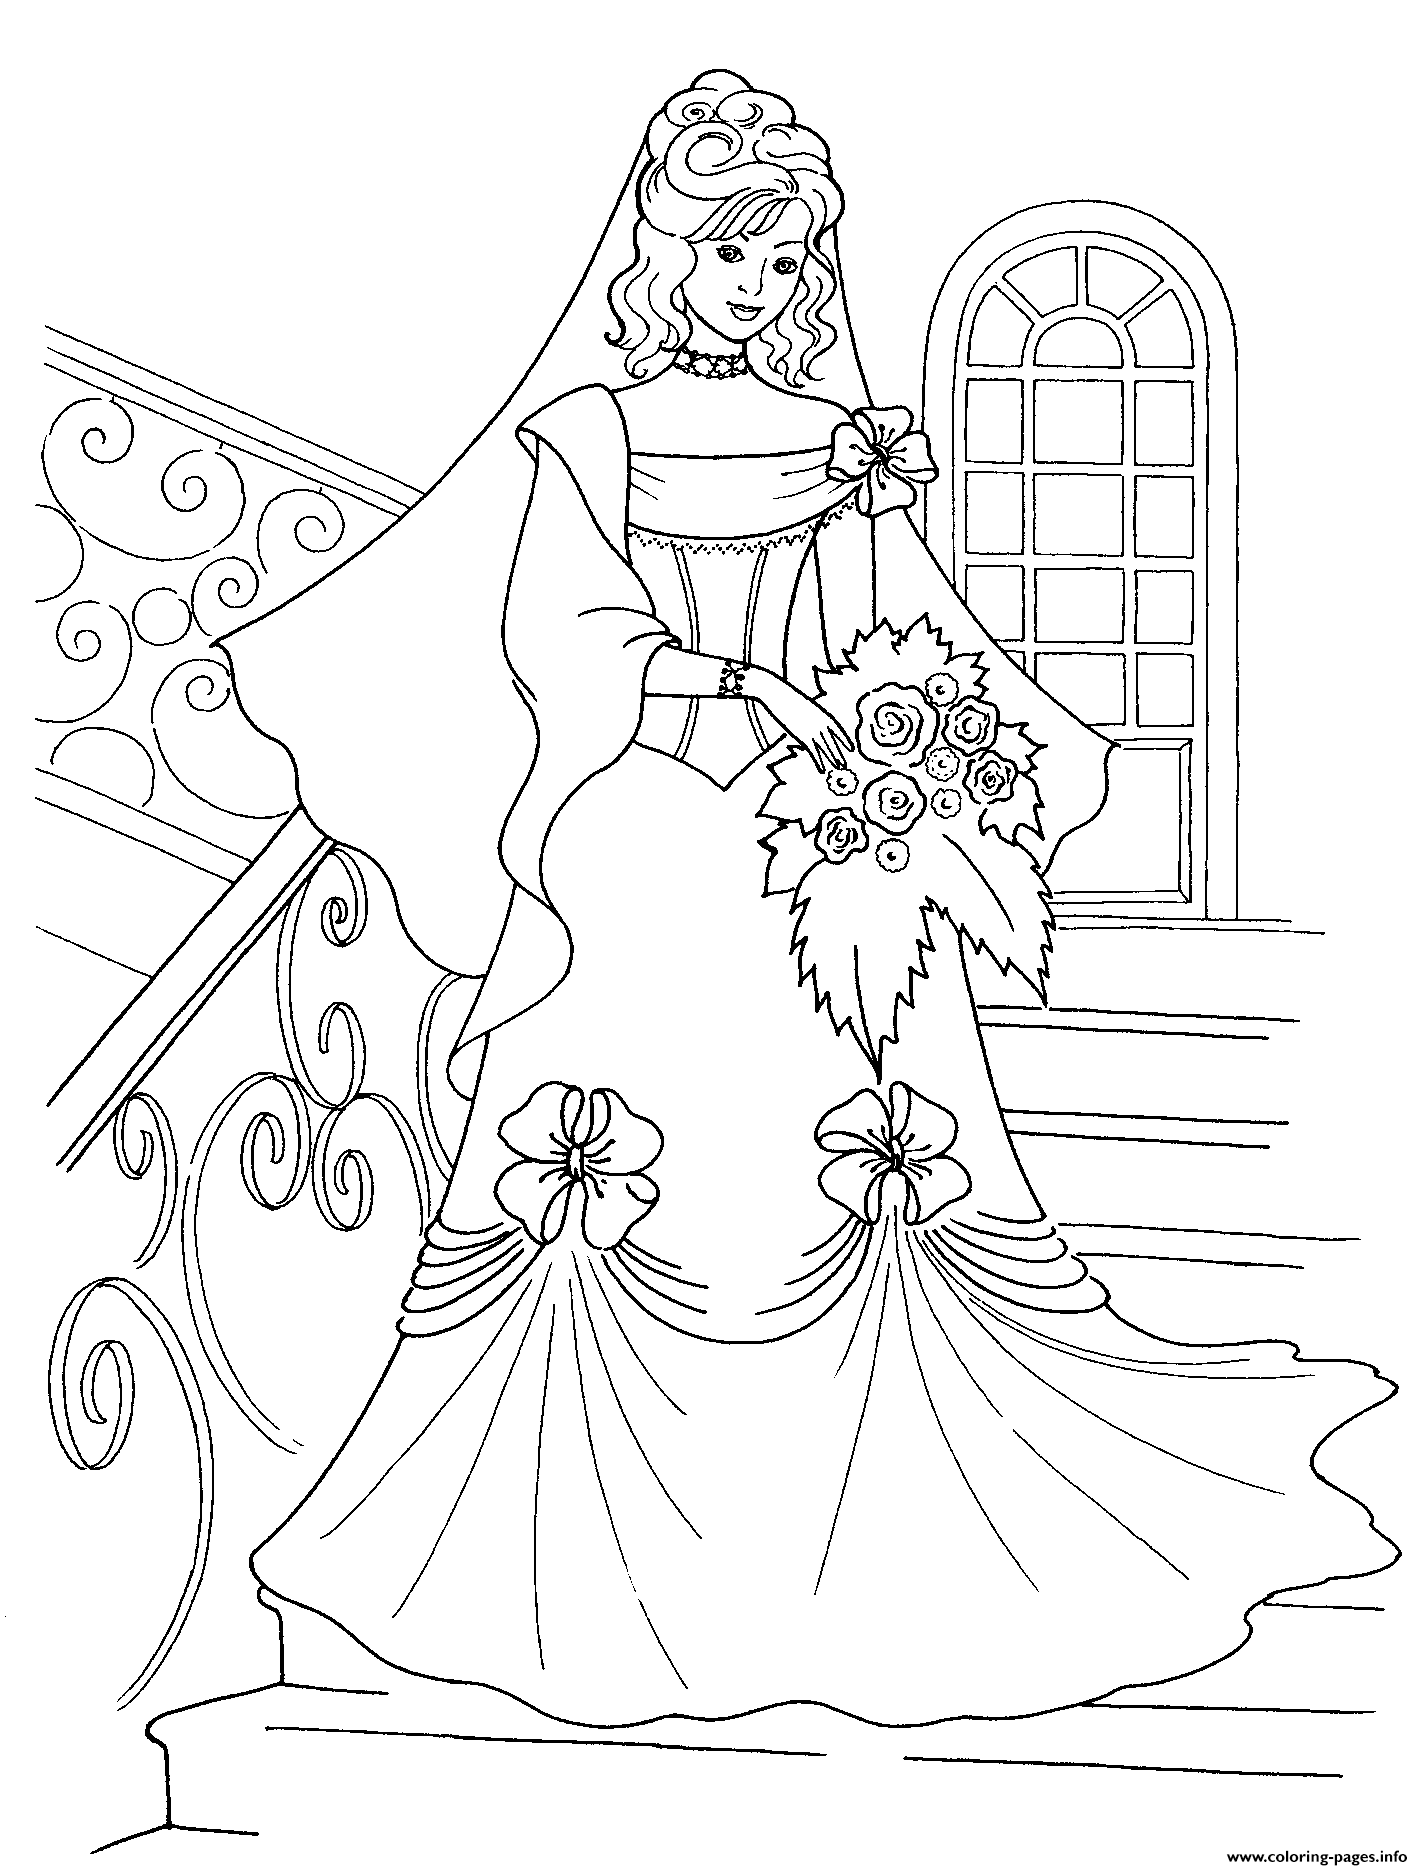 Princess And Her Wedding Dress Coloring Pages Printable